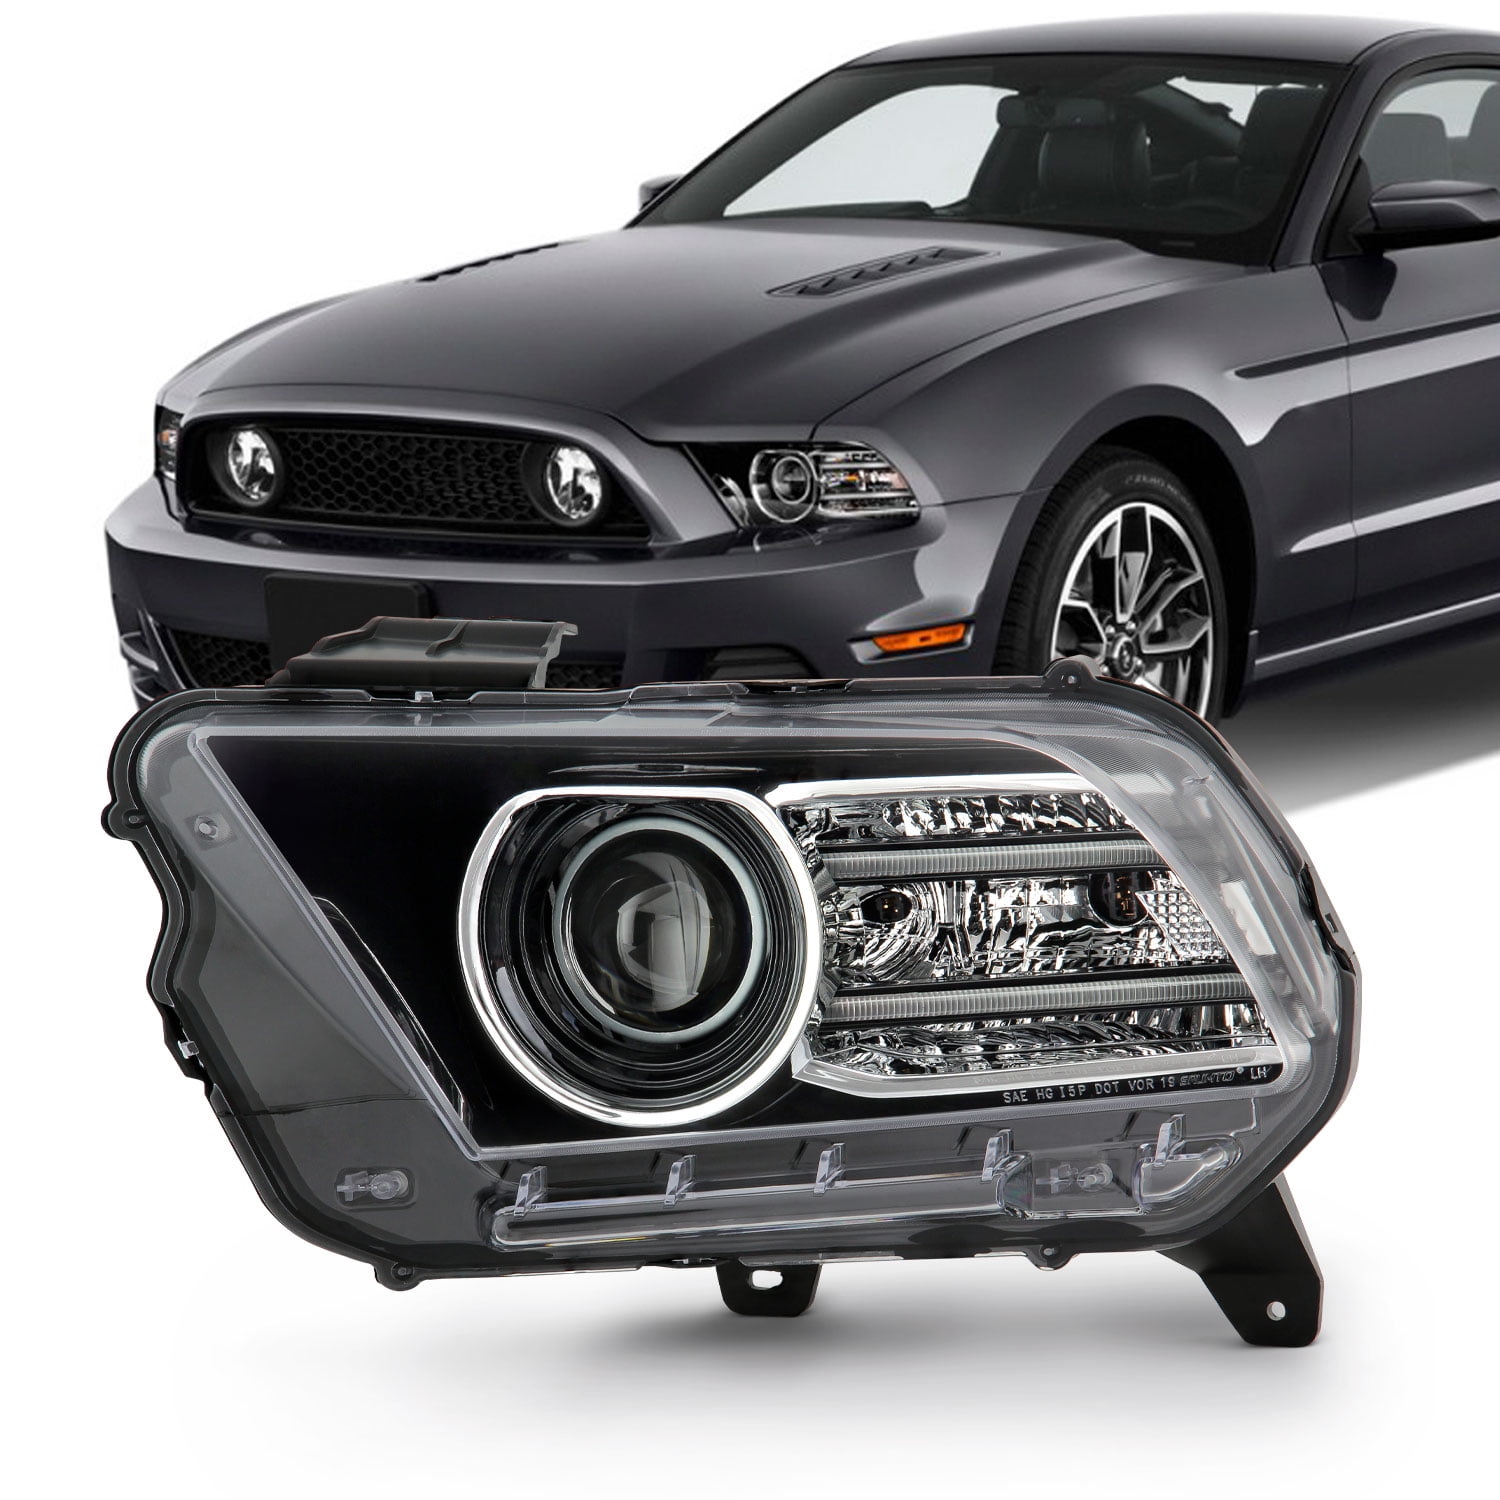 WOLFSTORM Headlight Assembly Fit for 2010 2011 2012 Ford Mustang,Sequential Dynamic Running Turn Design,Headlight Replacement for 2010 2011 2012 Ford Mustang with Halogen Bulbs Models 